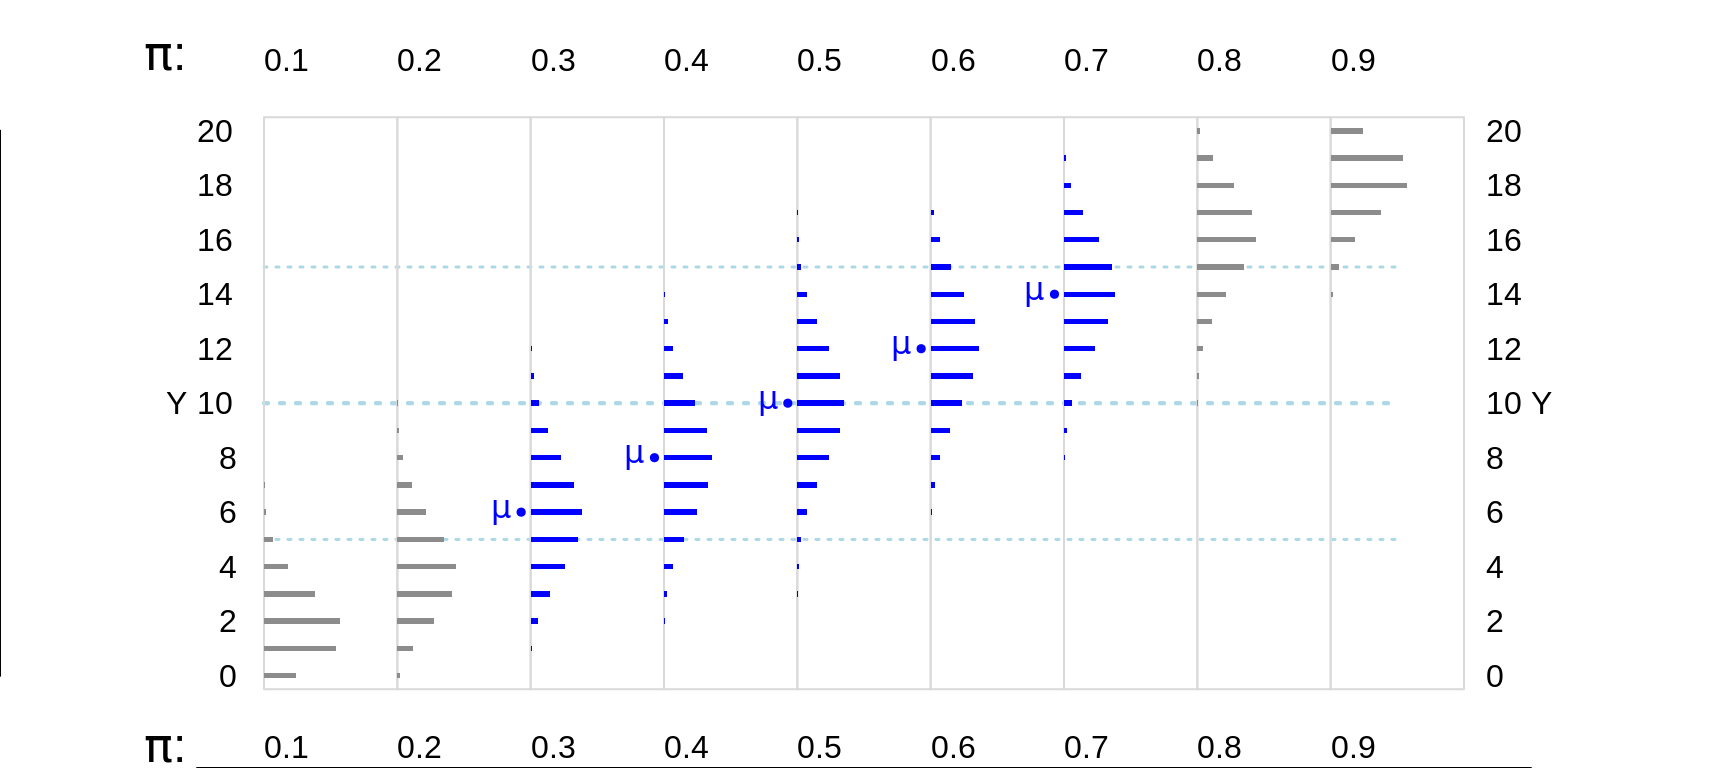 Various Binomial random variables/distributions, where n = 20. The dotted horizontal lines in light blue are 5 and 10 units in from the (0,n) boundaries. The distributions where the expected value E or mean, mu ( = n * Bernoulli Probability) is at least 5 units from the (0,n) boundaries are shown in blue.